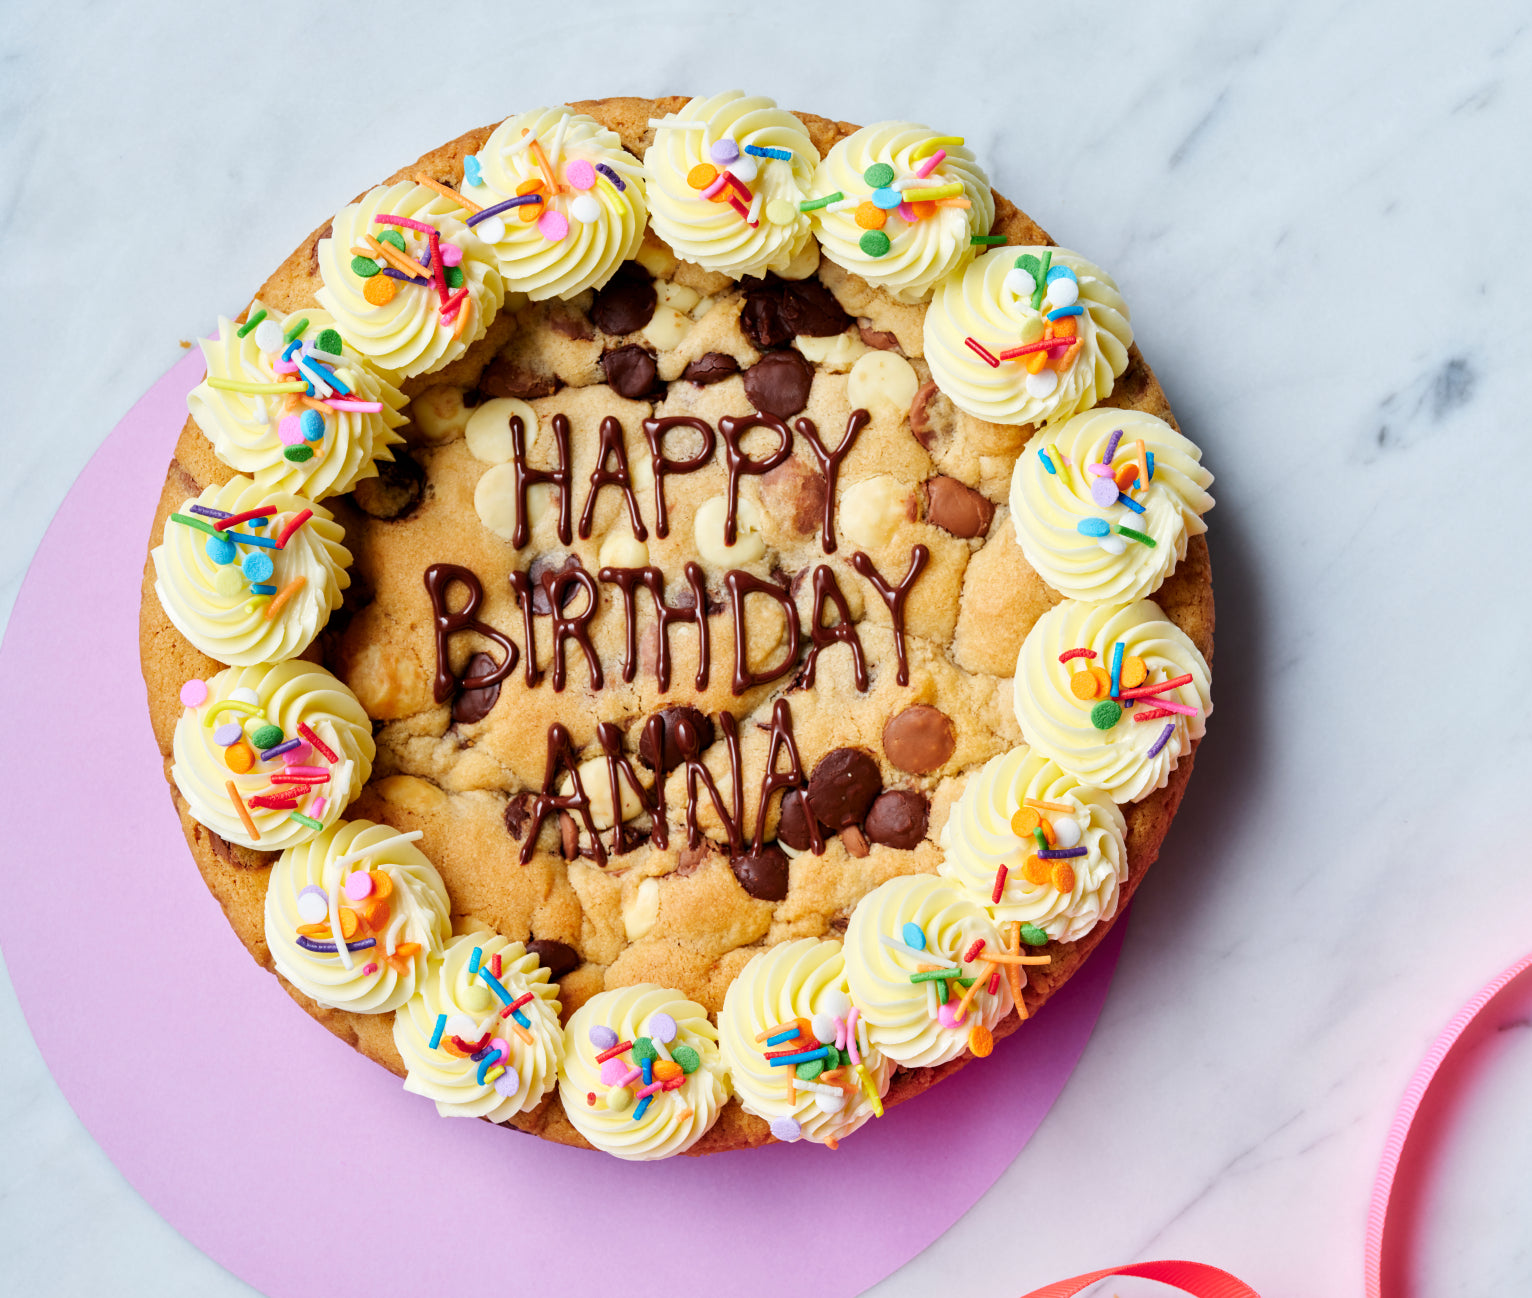 A cookie birthday cake with buttercream decorations